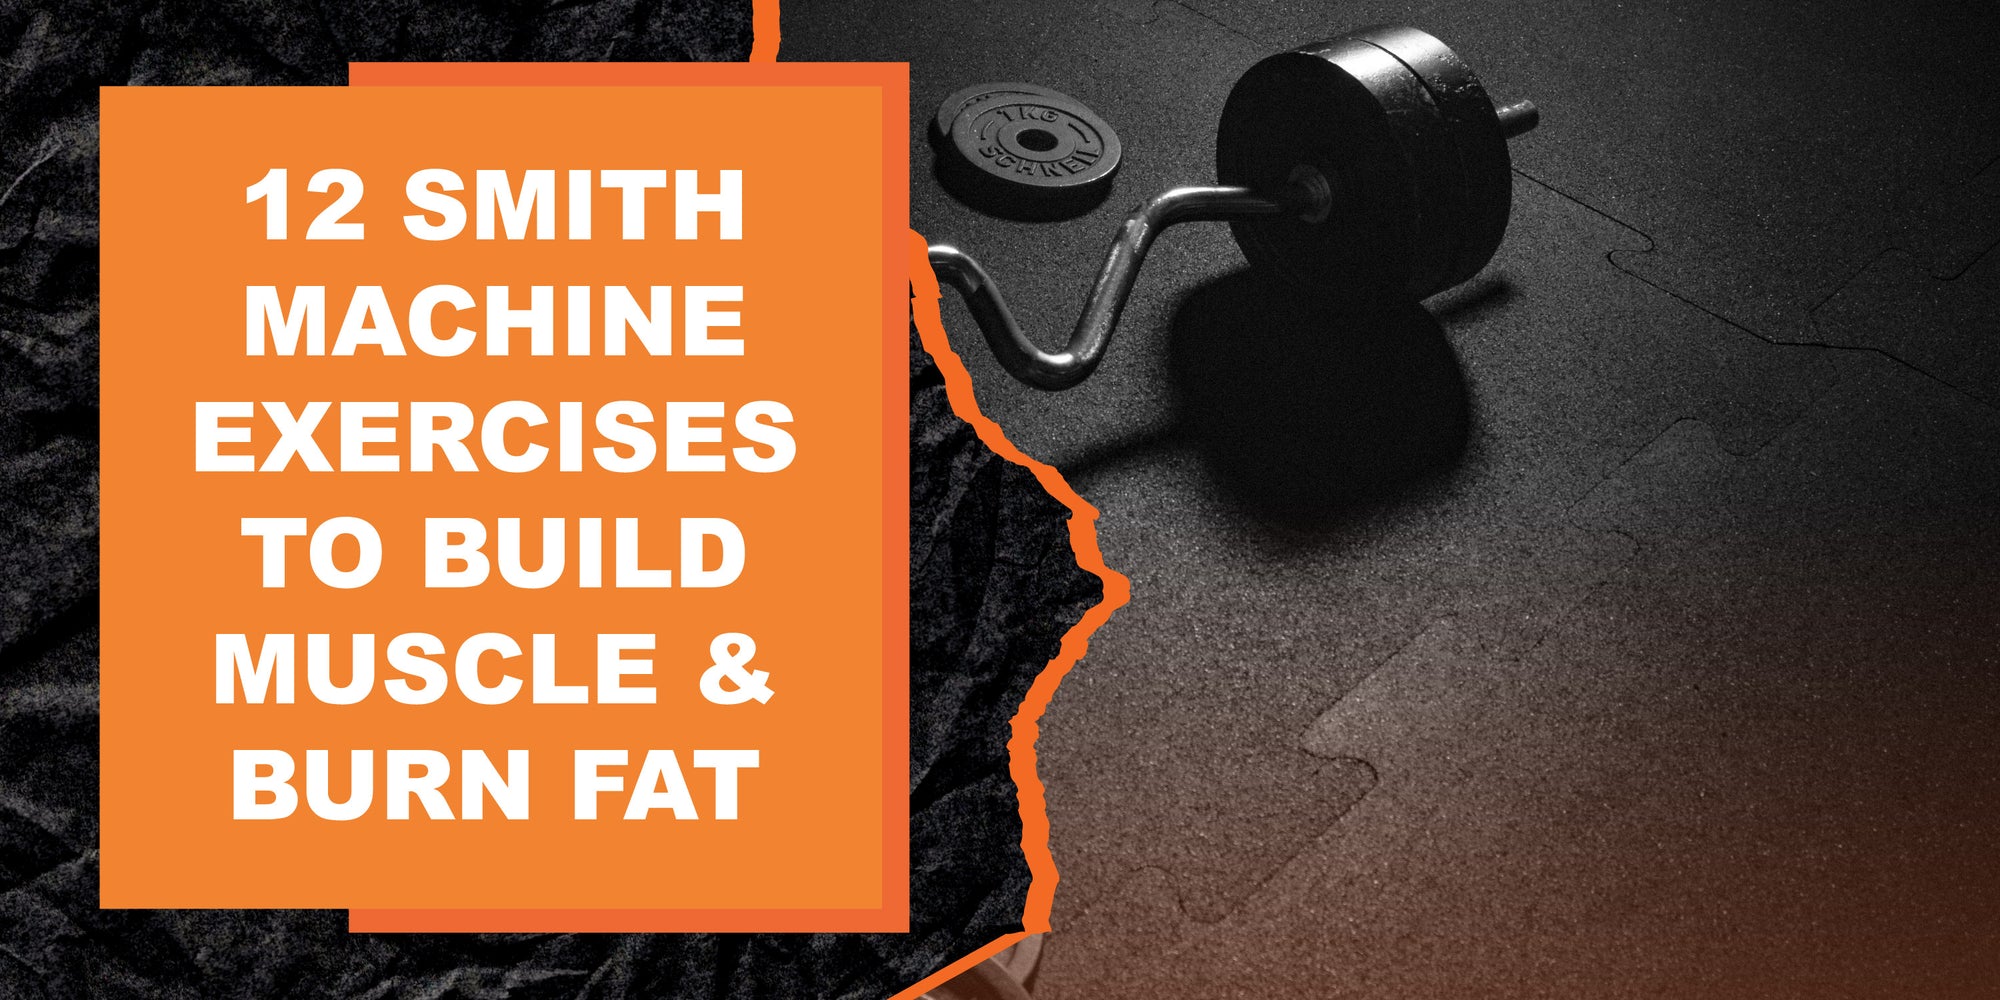 12 Smith Machine Exercises to Build Muscle & Burn Fat